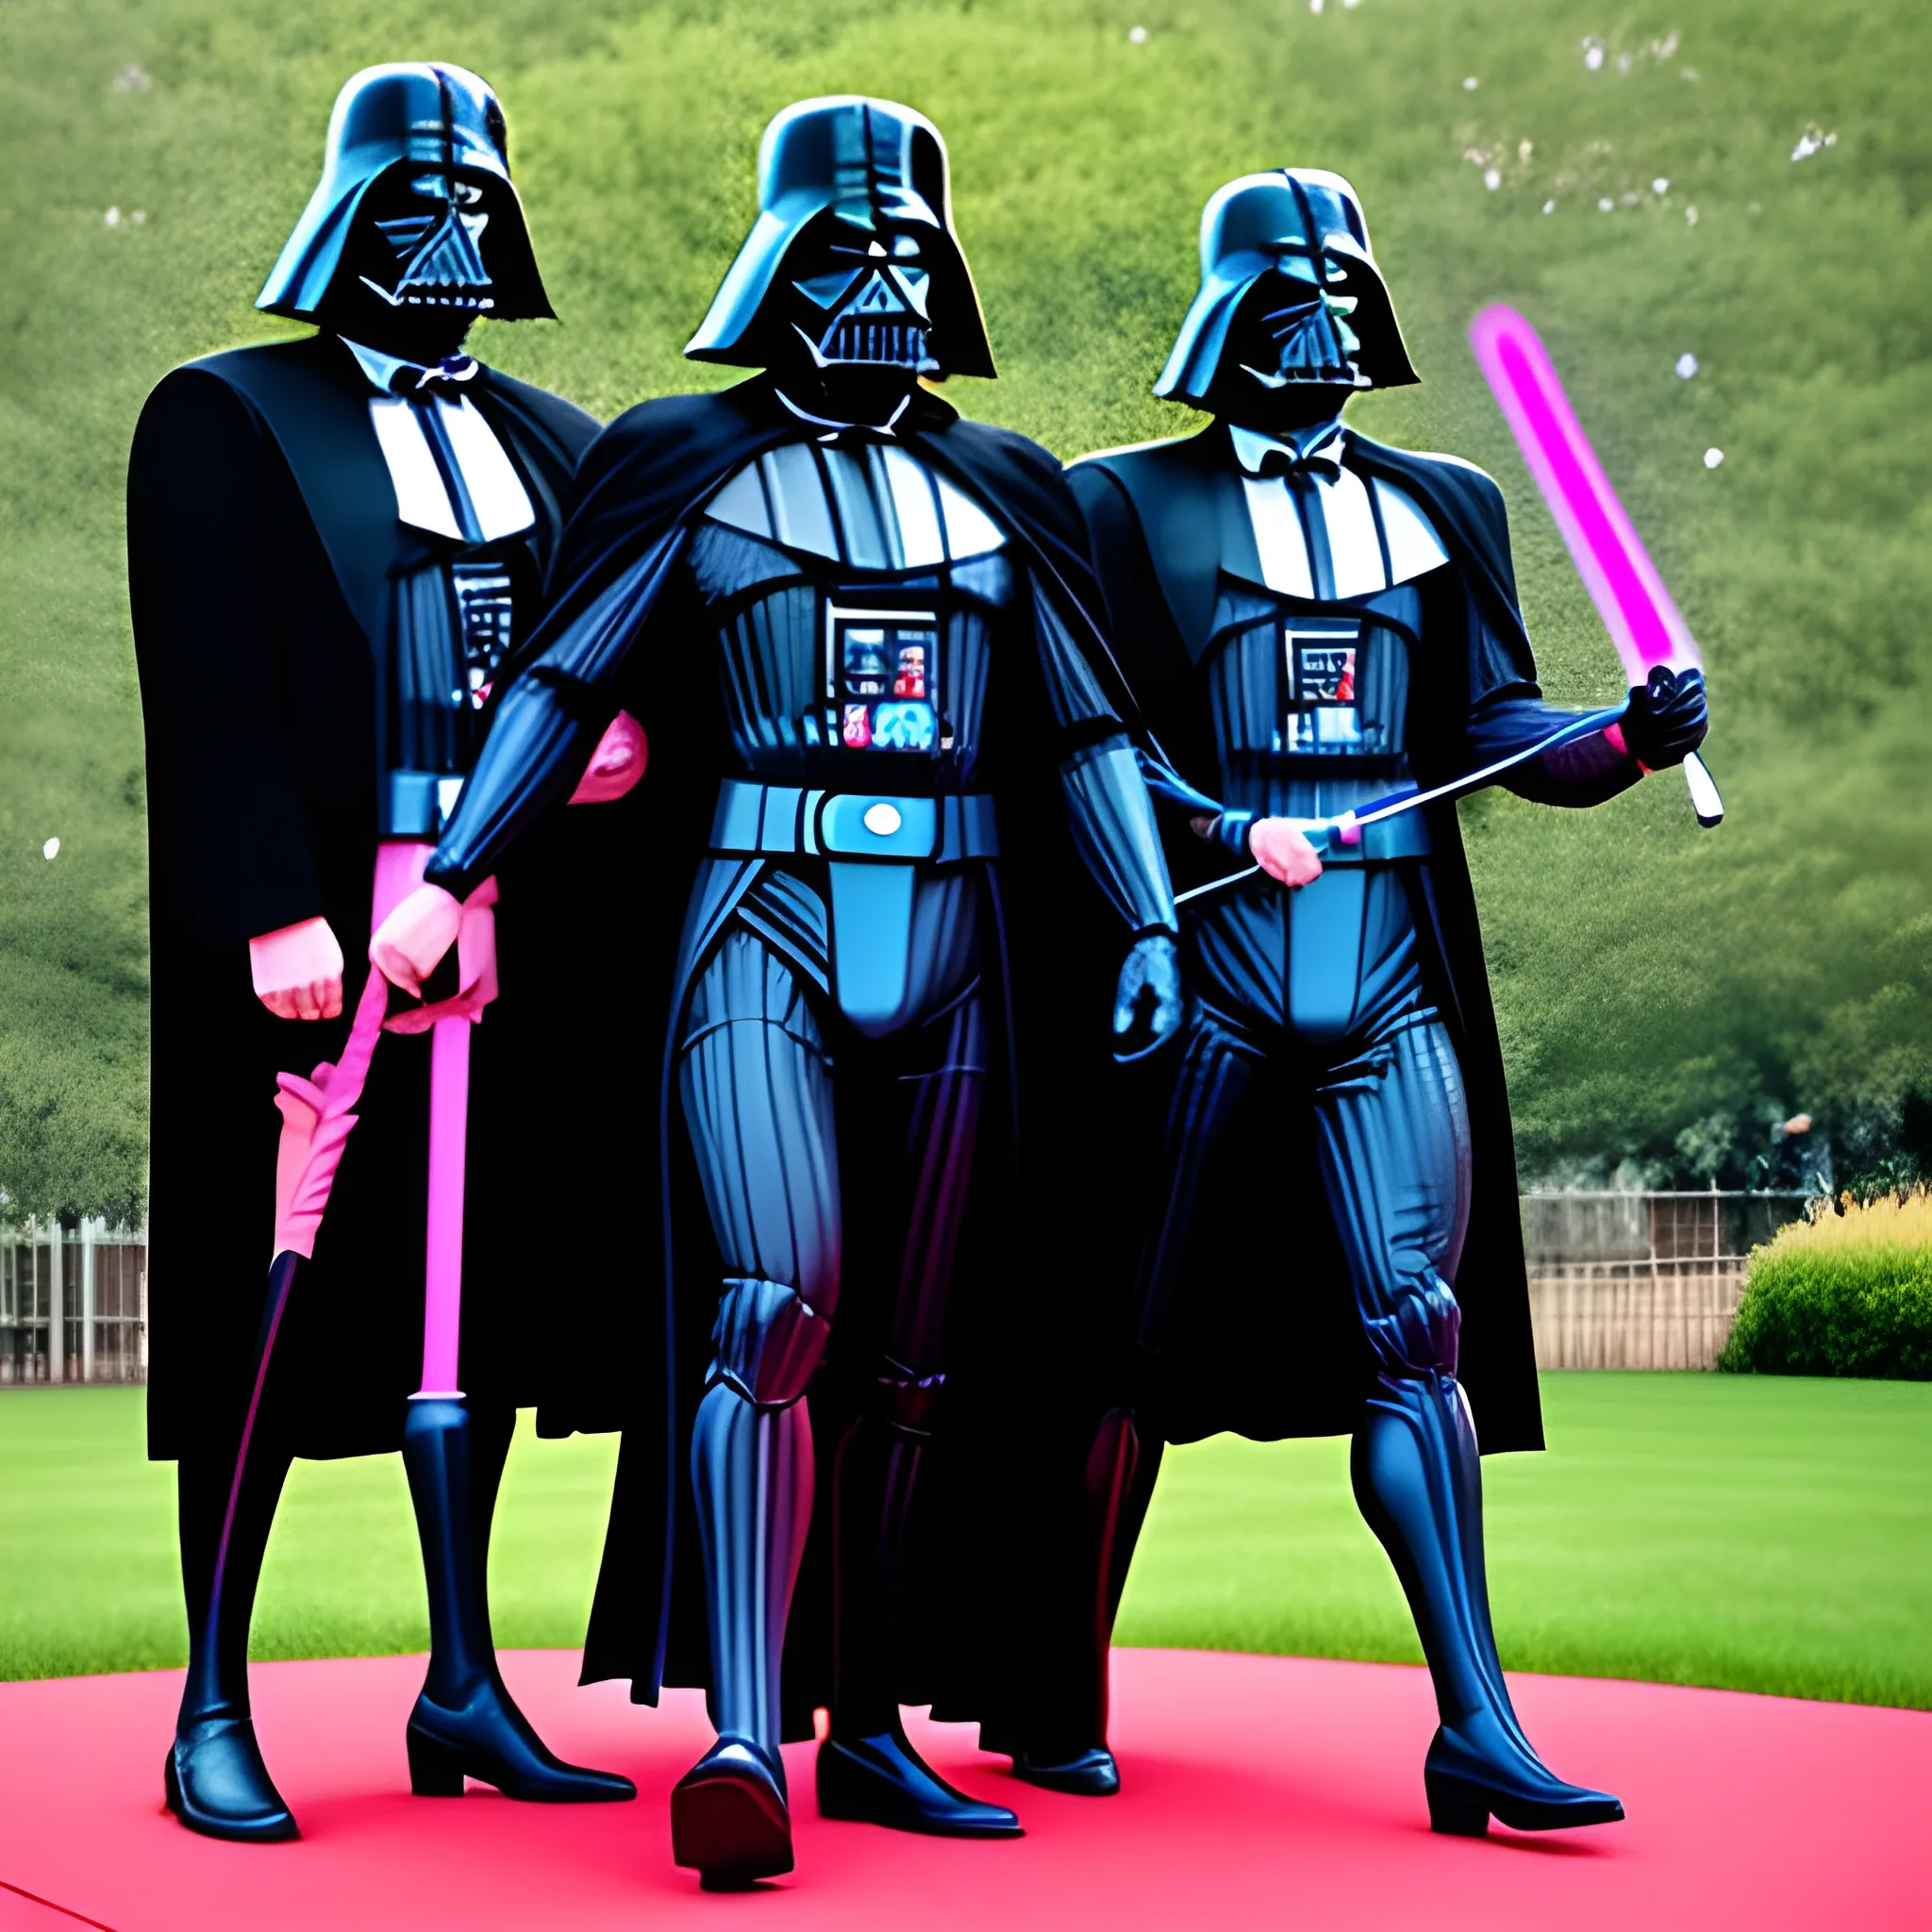 in a picnic, there are a four dark vaders: a dark vader man in a blue suit, a dark vader woman in a pink suit, a dark vader child in shorts and an old dark vader with a walking stick 